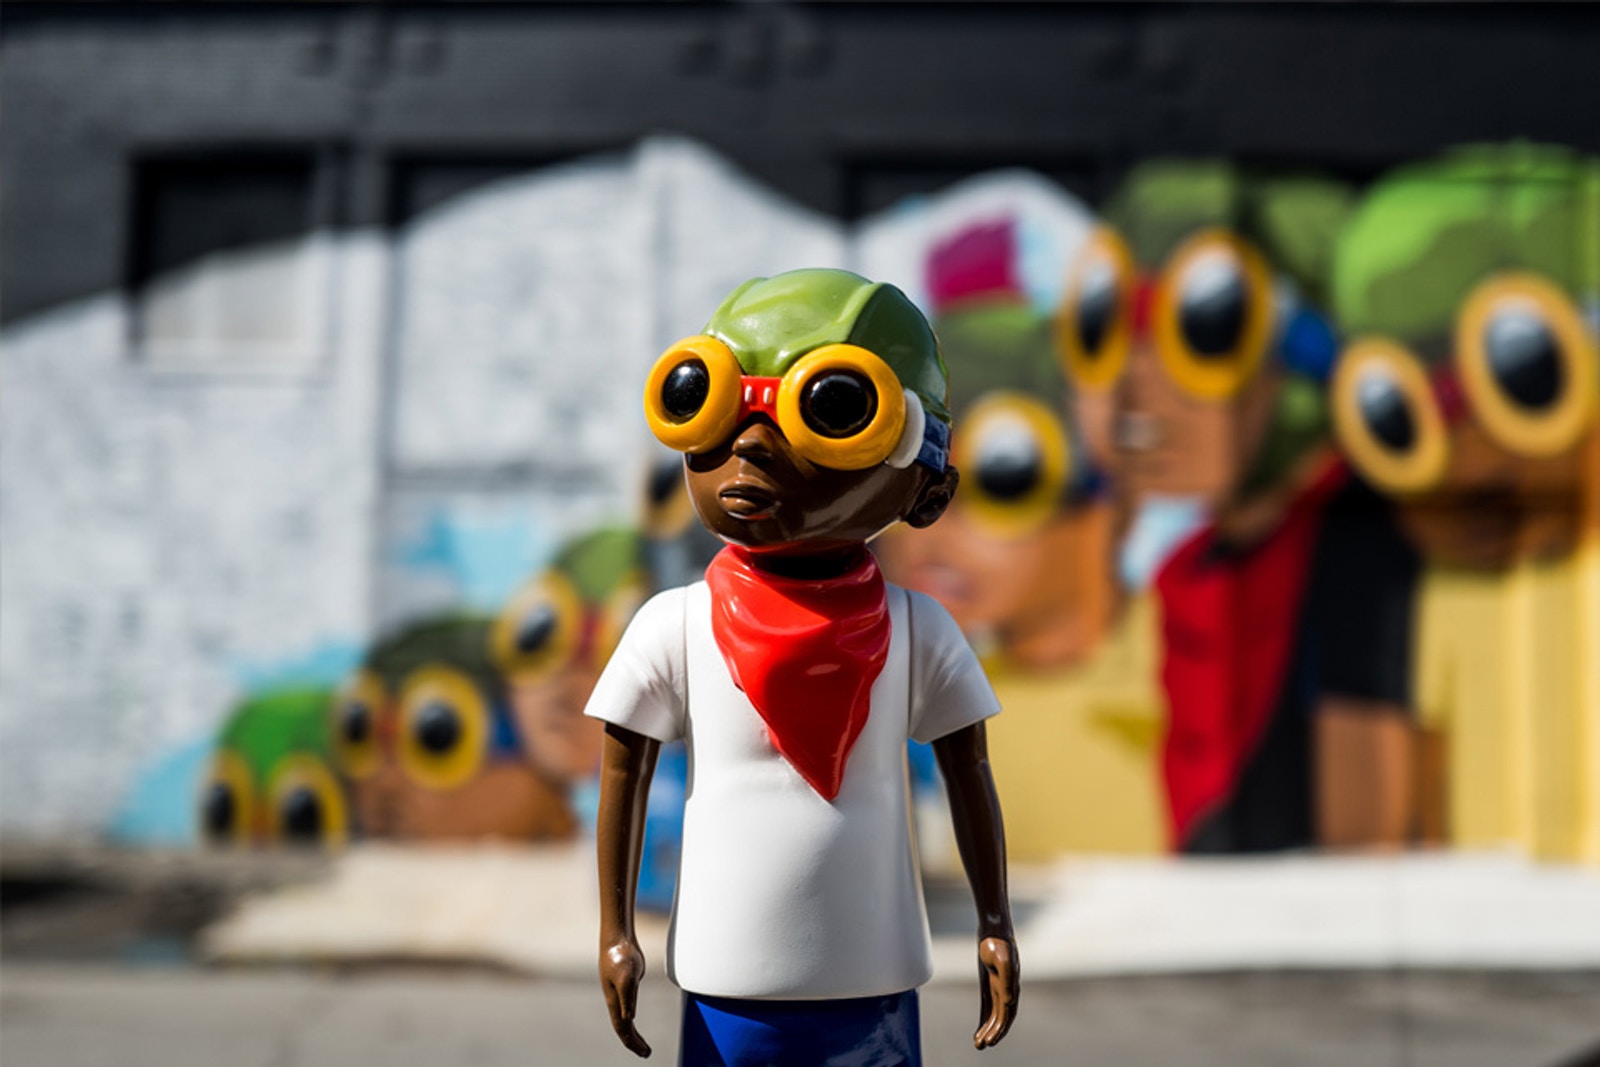 off white empty gallery lucien smith paul insect hebru brantley adam lucas jean jullien artworks art products limited items collectibles figures